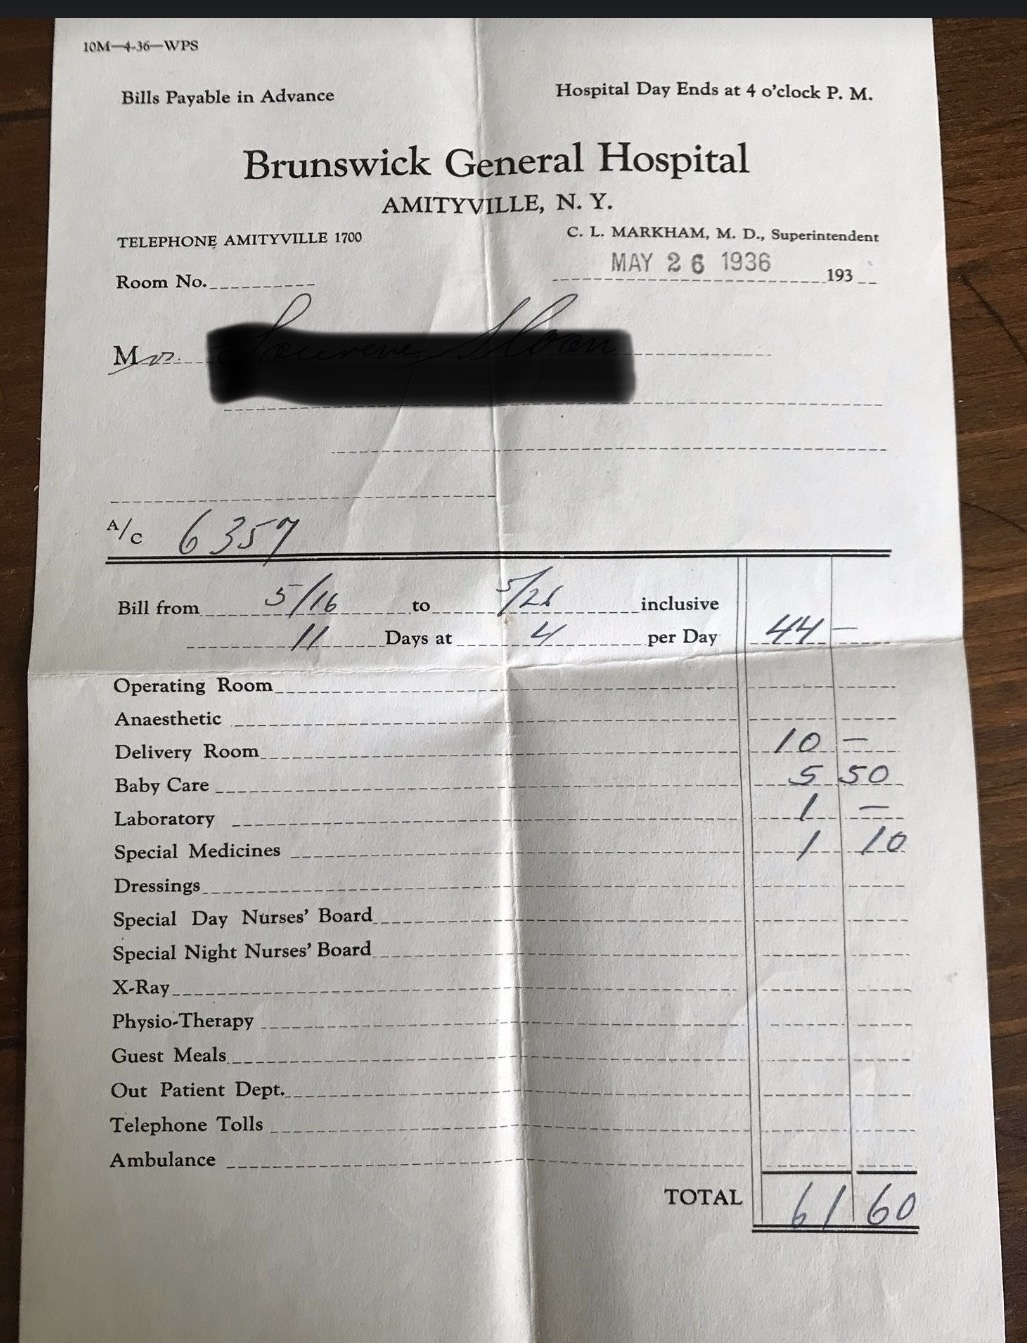 Invoice dated May 26, 1936, from Amityville, New York&#x27;s Brunswick General Hospital: Hospital fee was $4 a day for $44; delivery room was $10, baby care was $5.50, lab $1, special medicines $1.10, for a total of $61.60